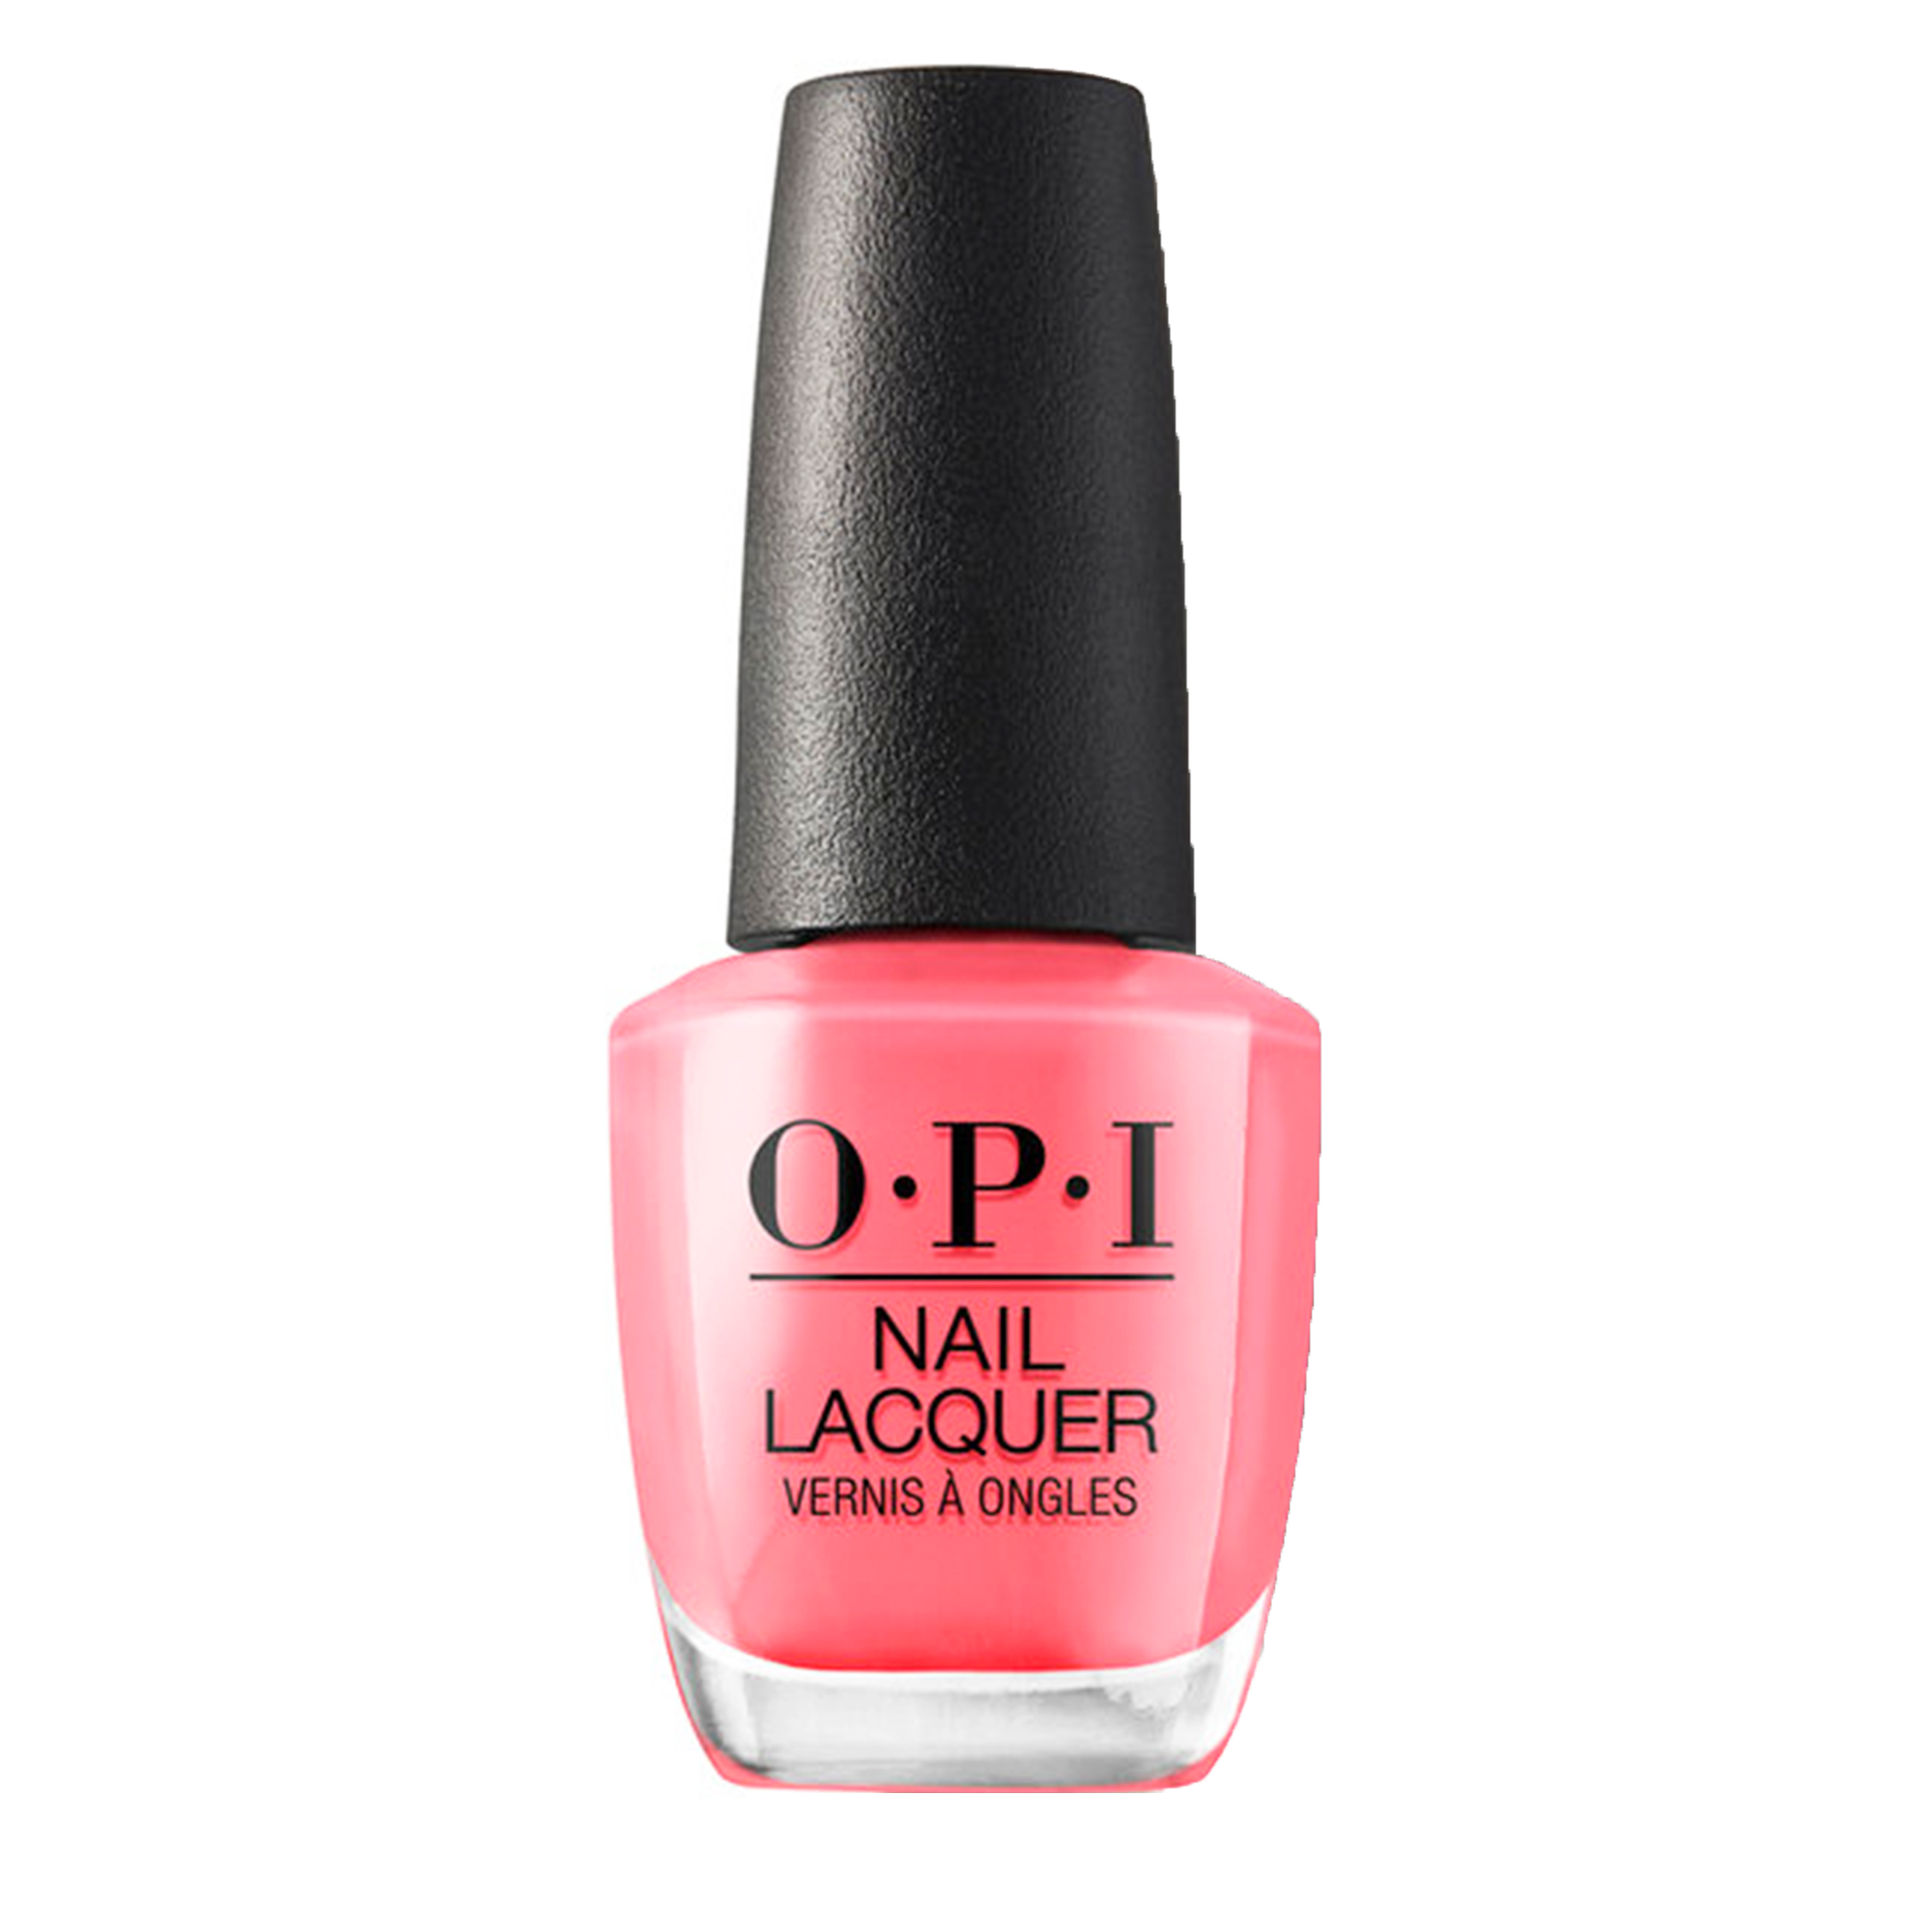 Village Wellness Spa - OPI Nail Lacquer ElePhantastic Pink - Full Size 15ml